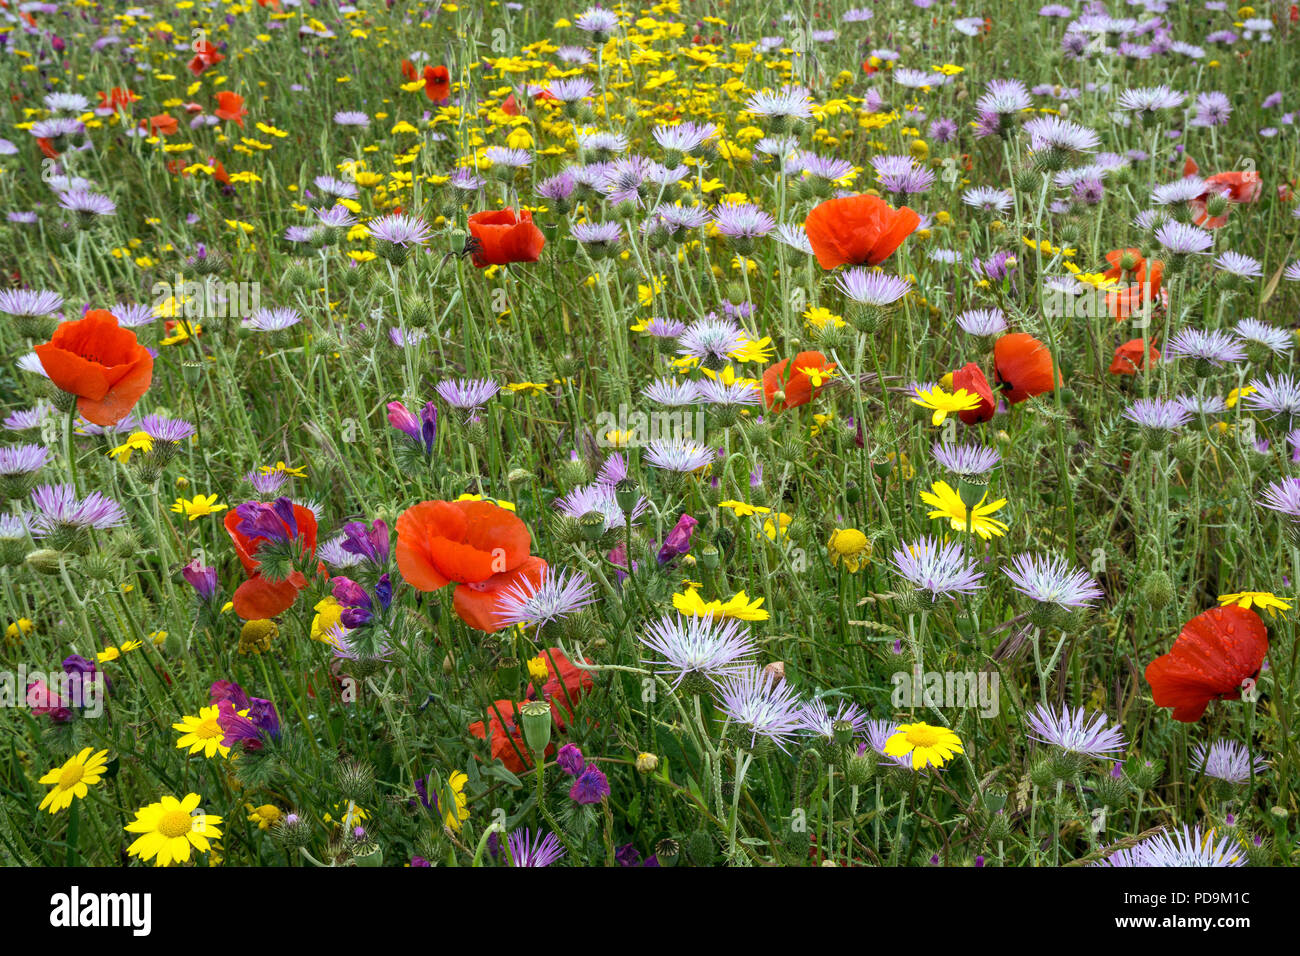 Blooming flower meadow with Purple Milk Thistles (Galactites tomentosus), Corn poppy (Papaver rhoeas) and Arnica (Arnica Stock Photo